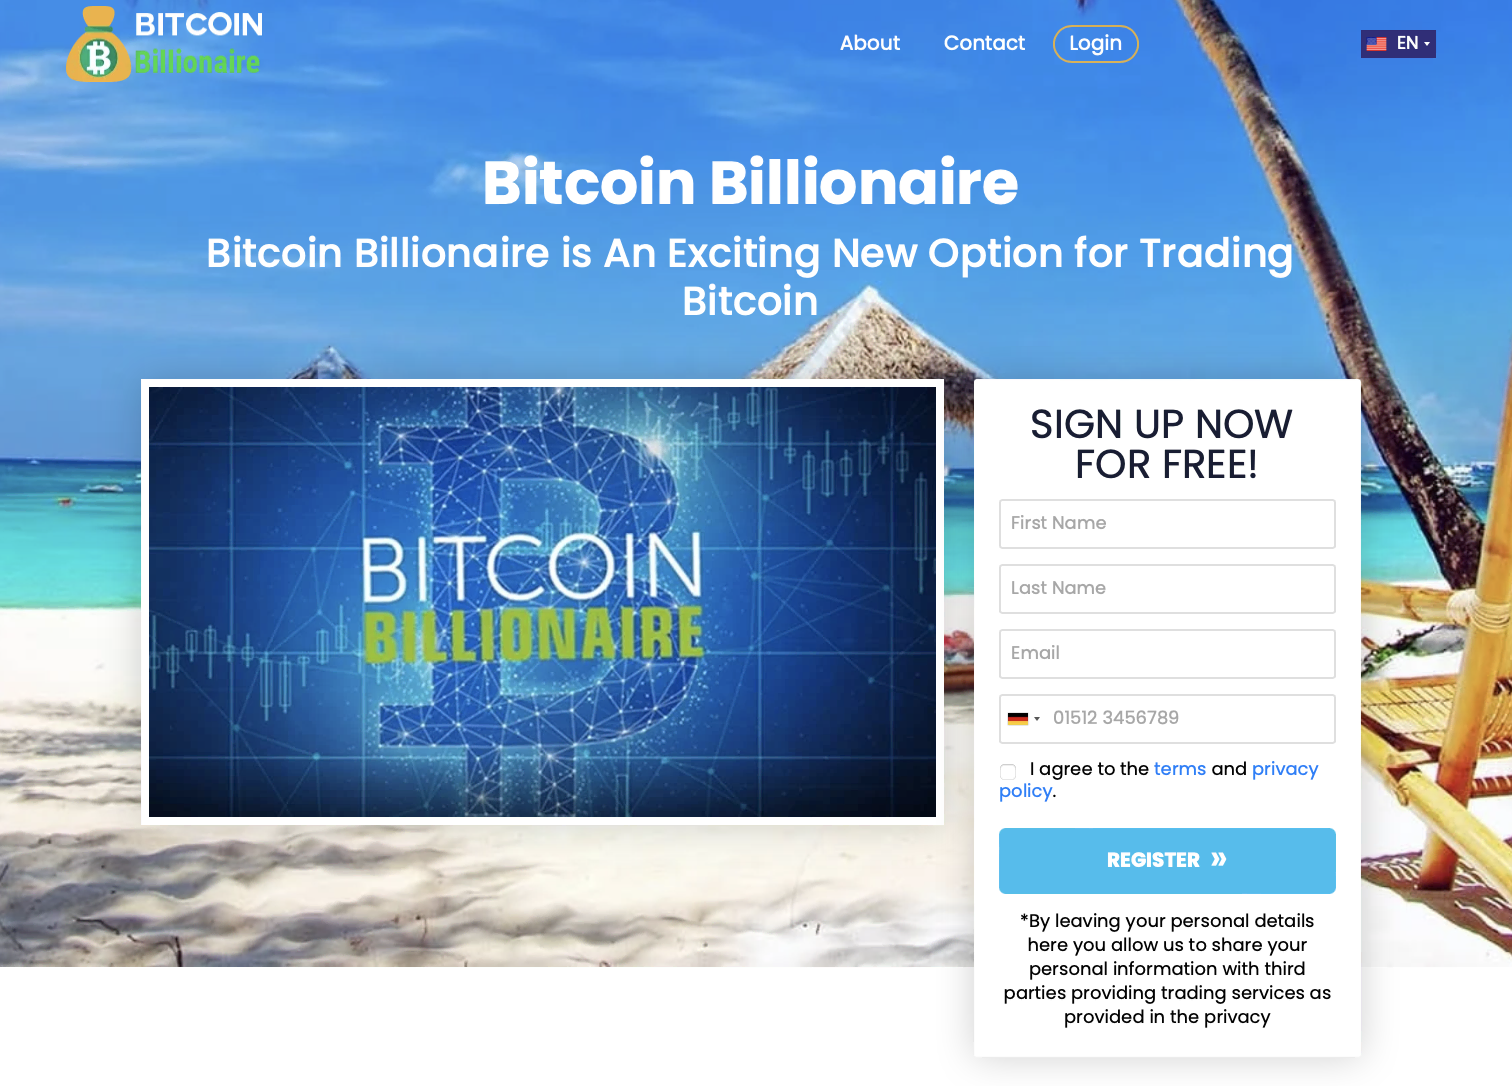 The official website of the Bitcoin Billionaire